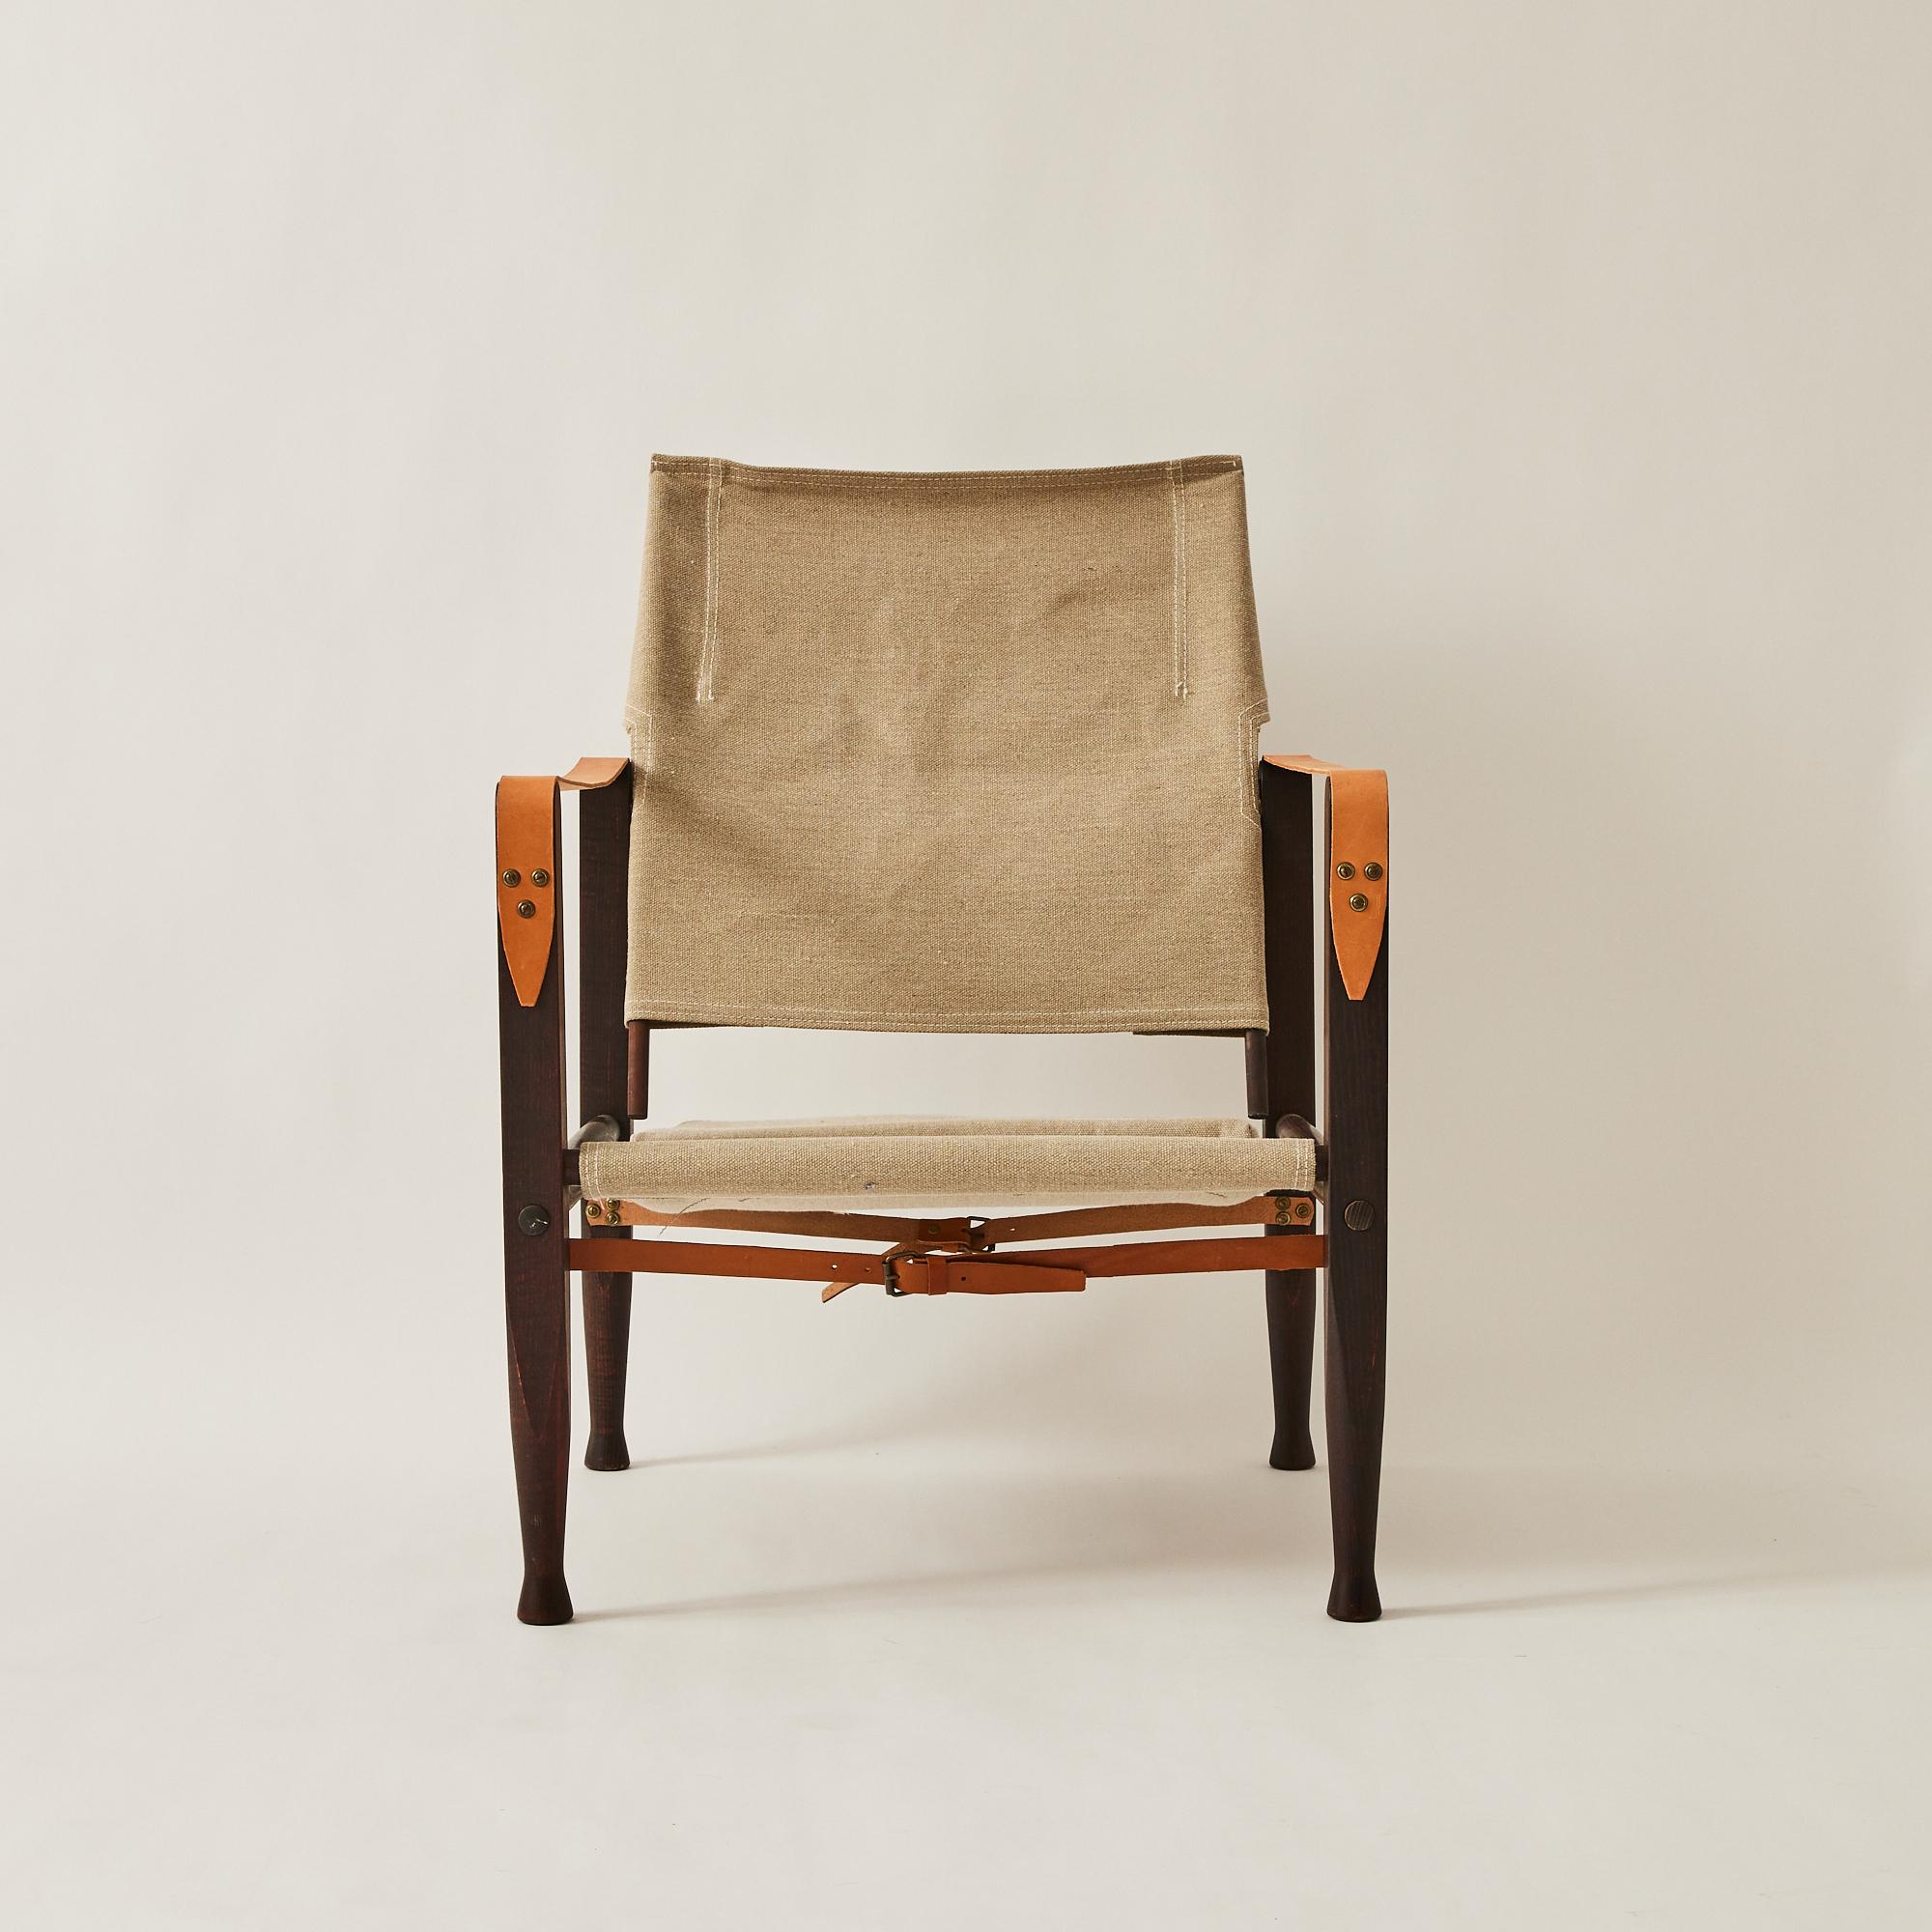 Kaare Klint Safari Chairs for Rud Rasmussen in Ash and Canvas- a Pair For Sale 2